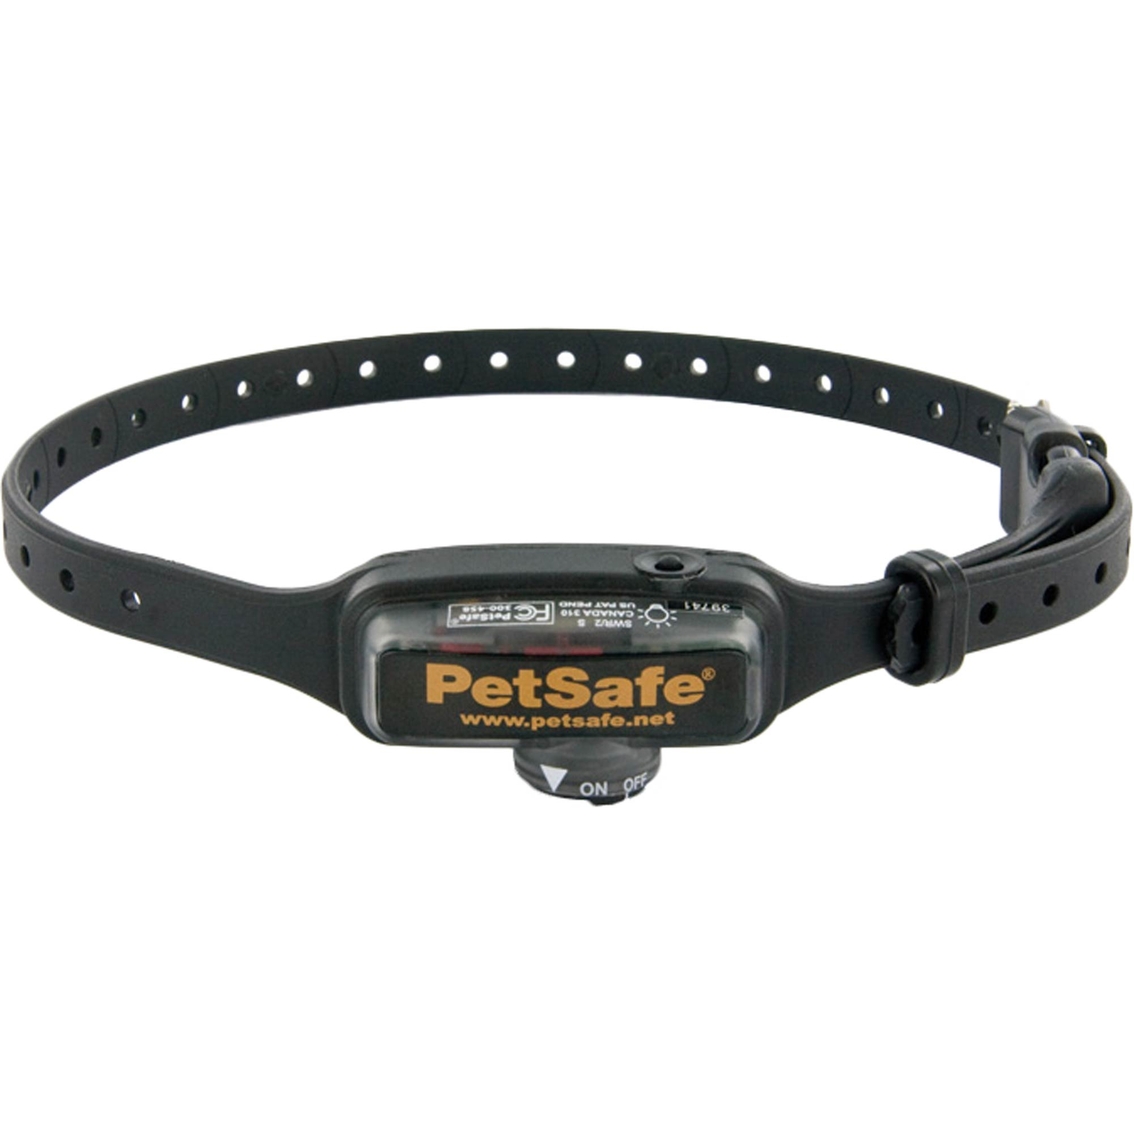 Elite Little Dog In-Ground Fence Receiver Collar - Image 2 of 2